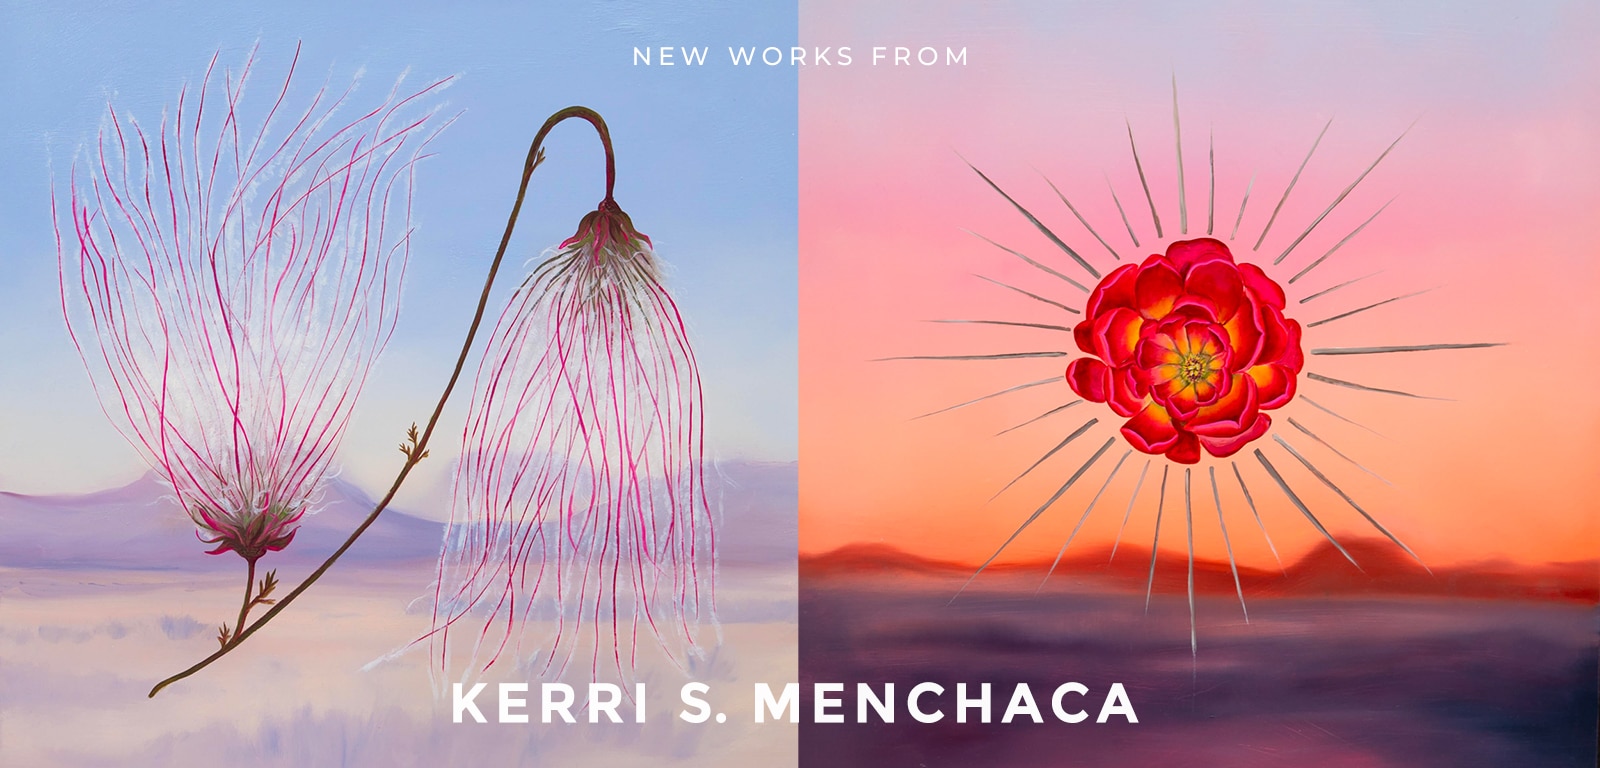 New works by contemporary painter Kerri S. Menchaca